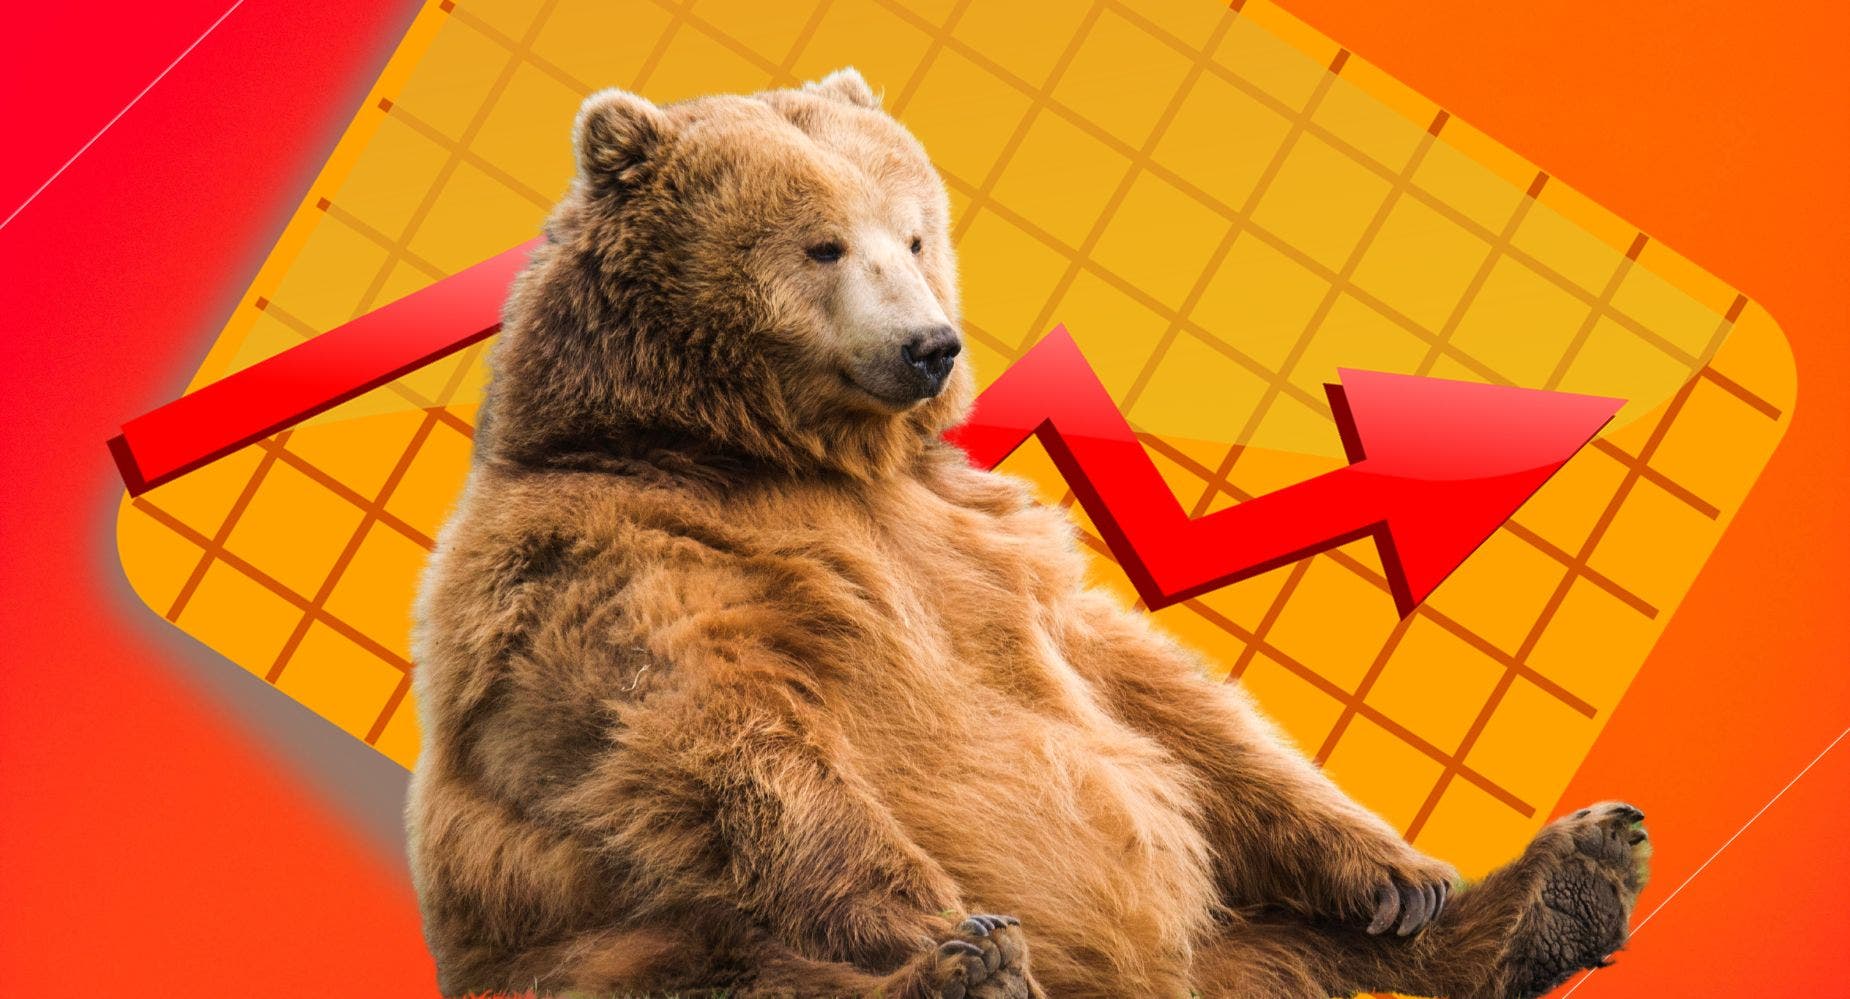 Single-Stock ETFs Would Let Bears Bet Against AMC, Tilray And Other Meme Stocks: What Investors Should Know